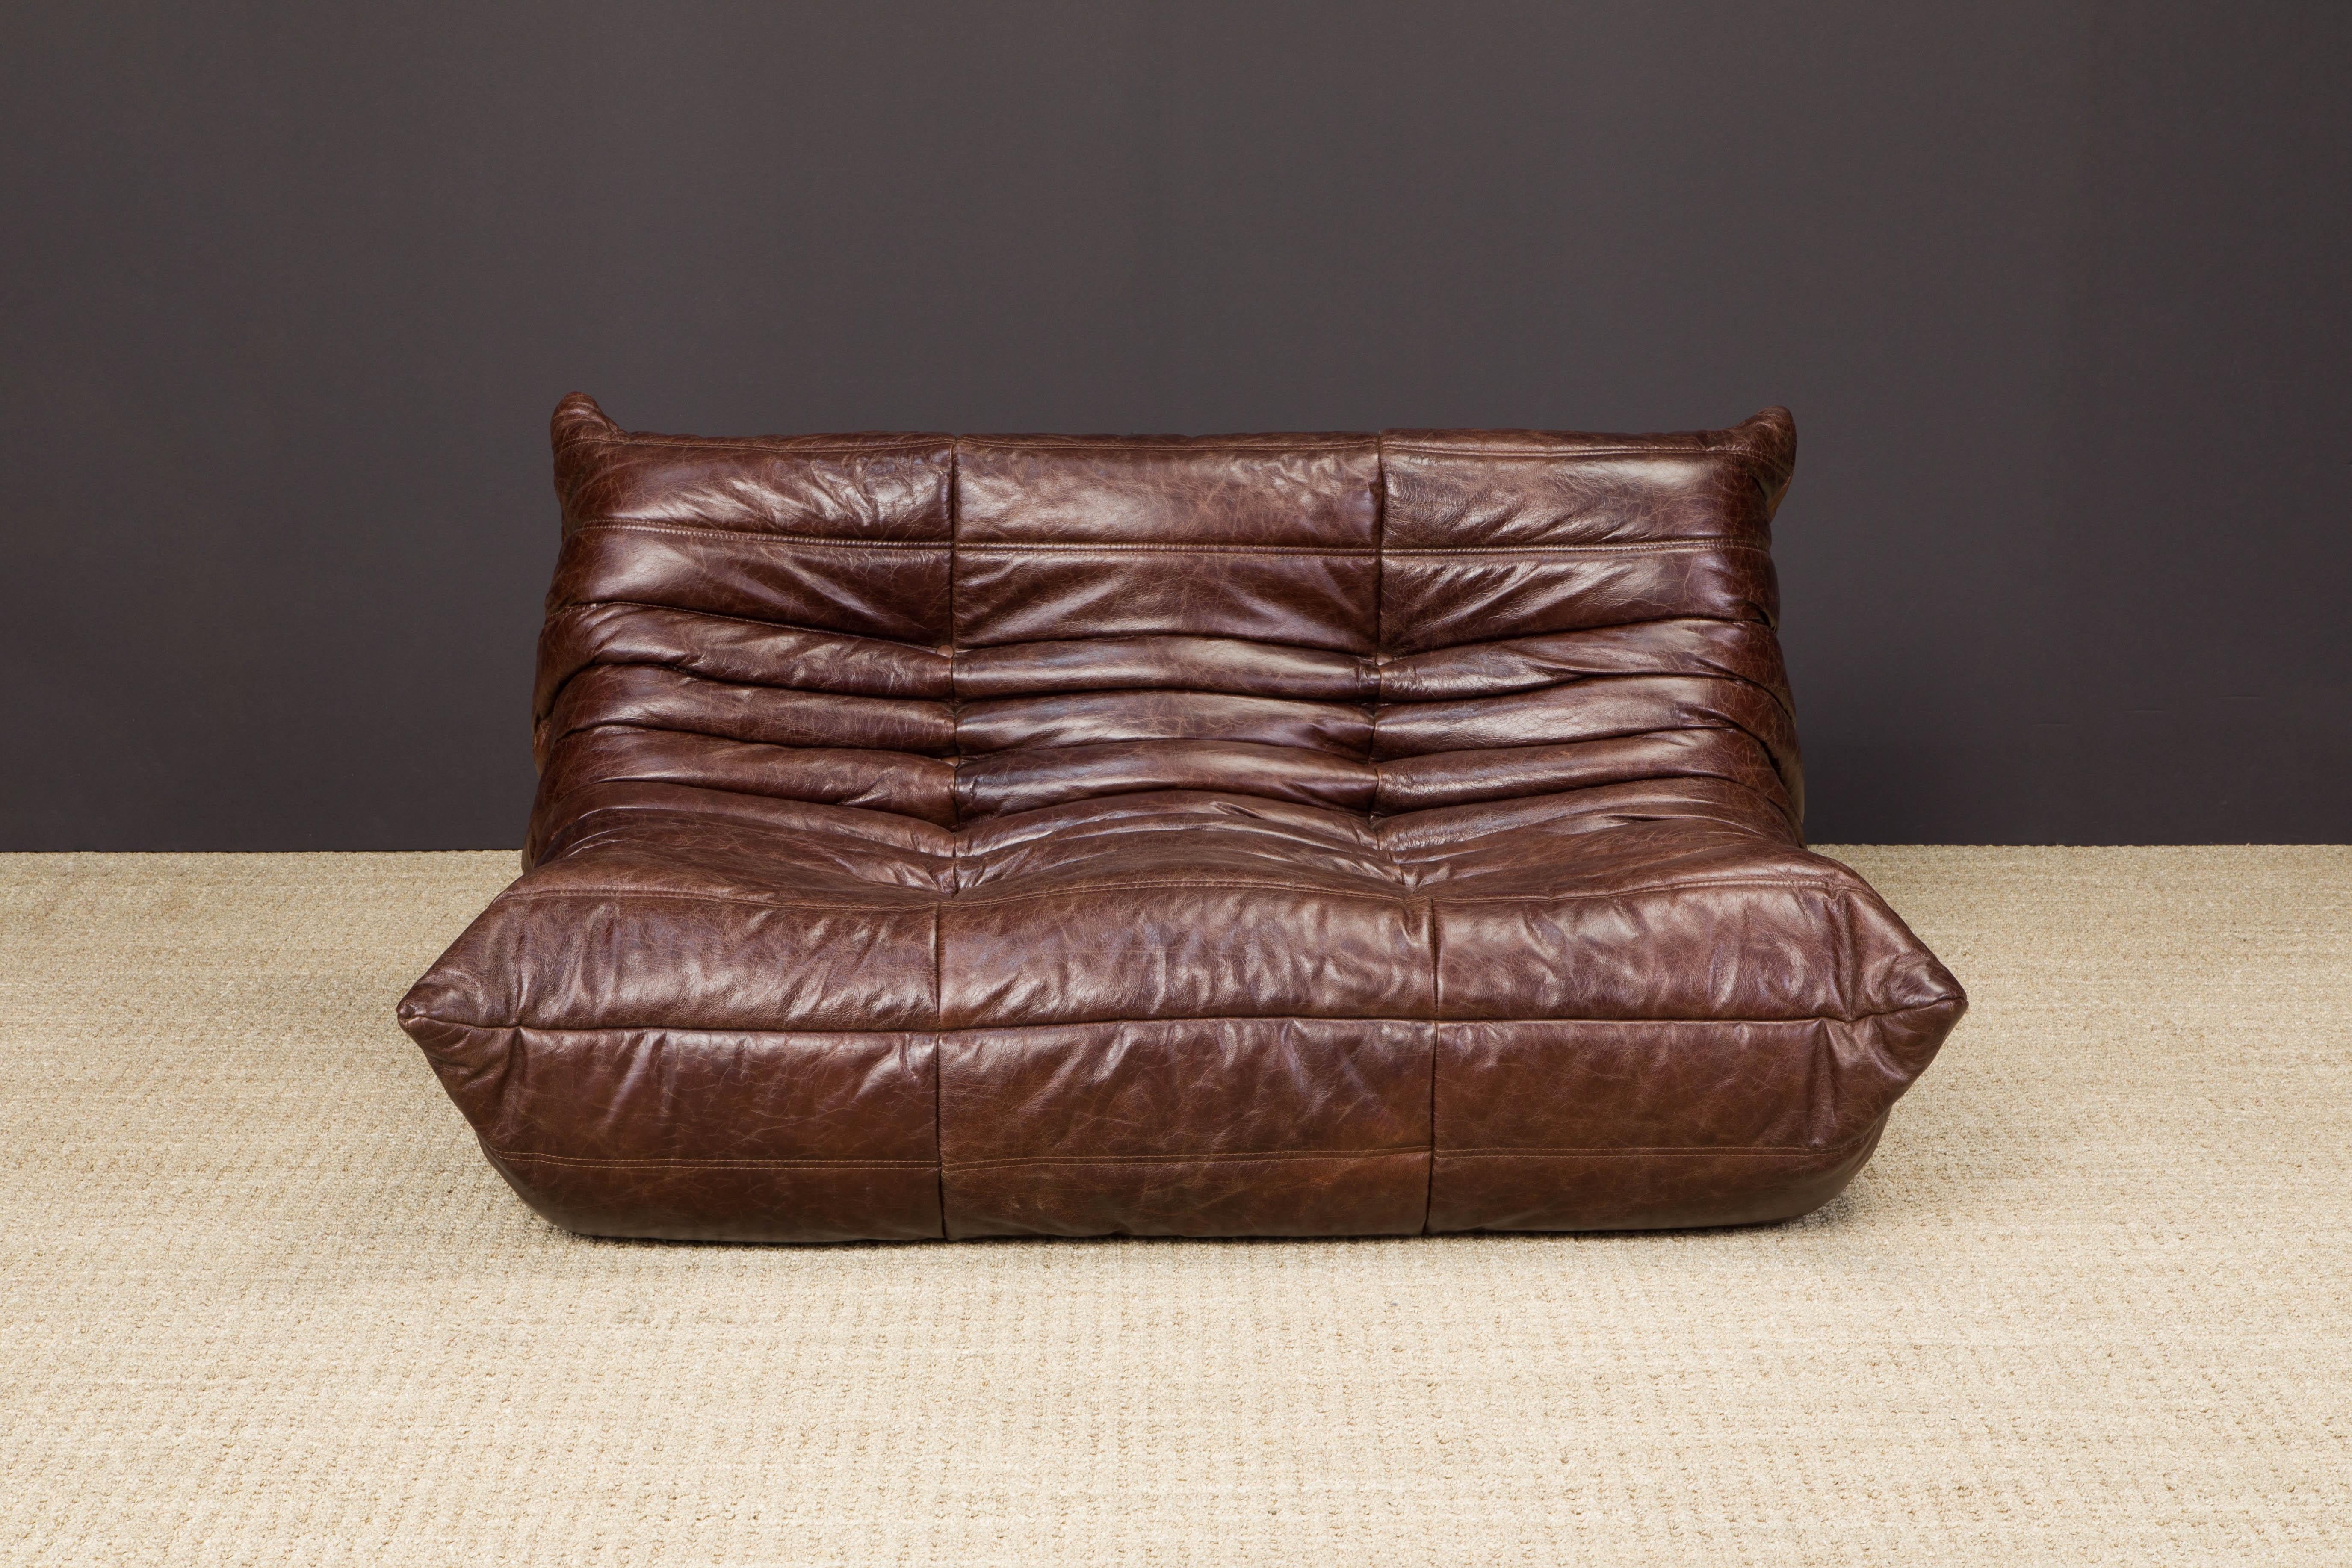 This gorgeous deep brown leather 'Togo' loveseat sofa was designed by Michel Ducaroy in 1973 for Ligne Roset, France. Signed with Ligne Roset Made in France label and has Ligne Roset fabric underneath. 

Timeless design and classic style make this